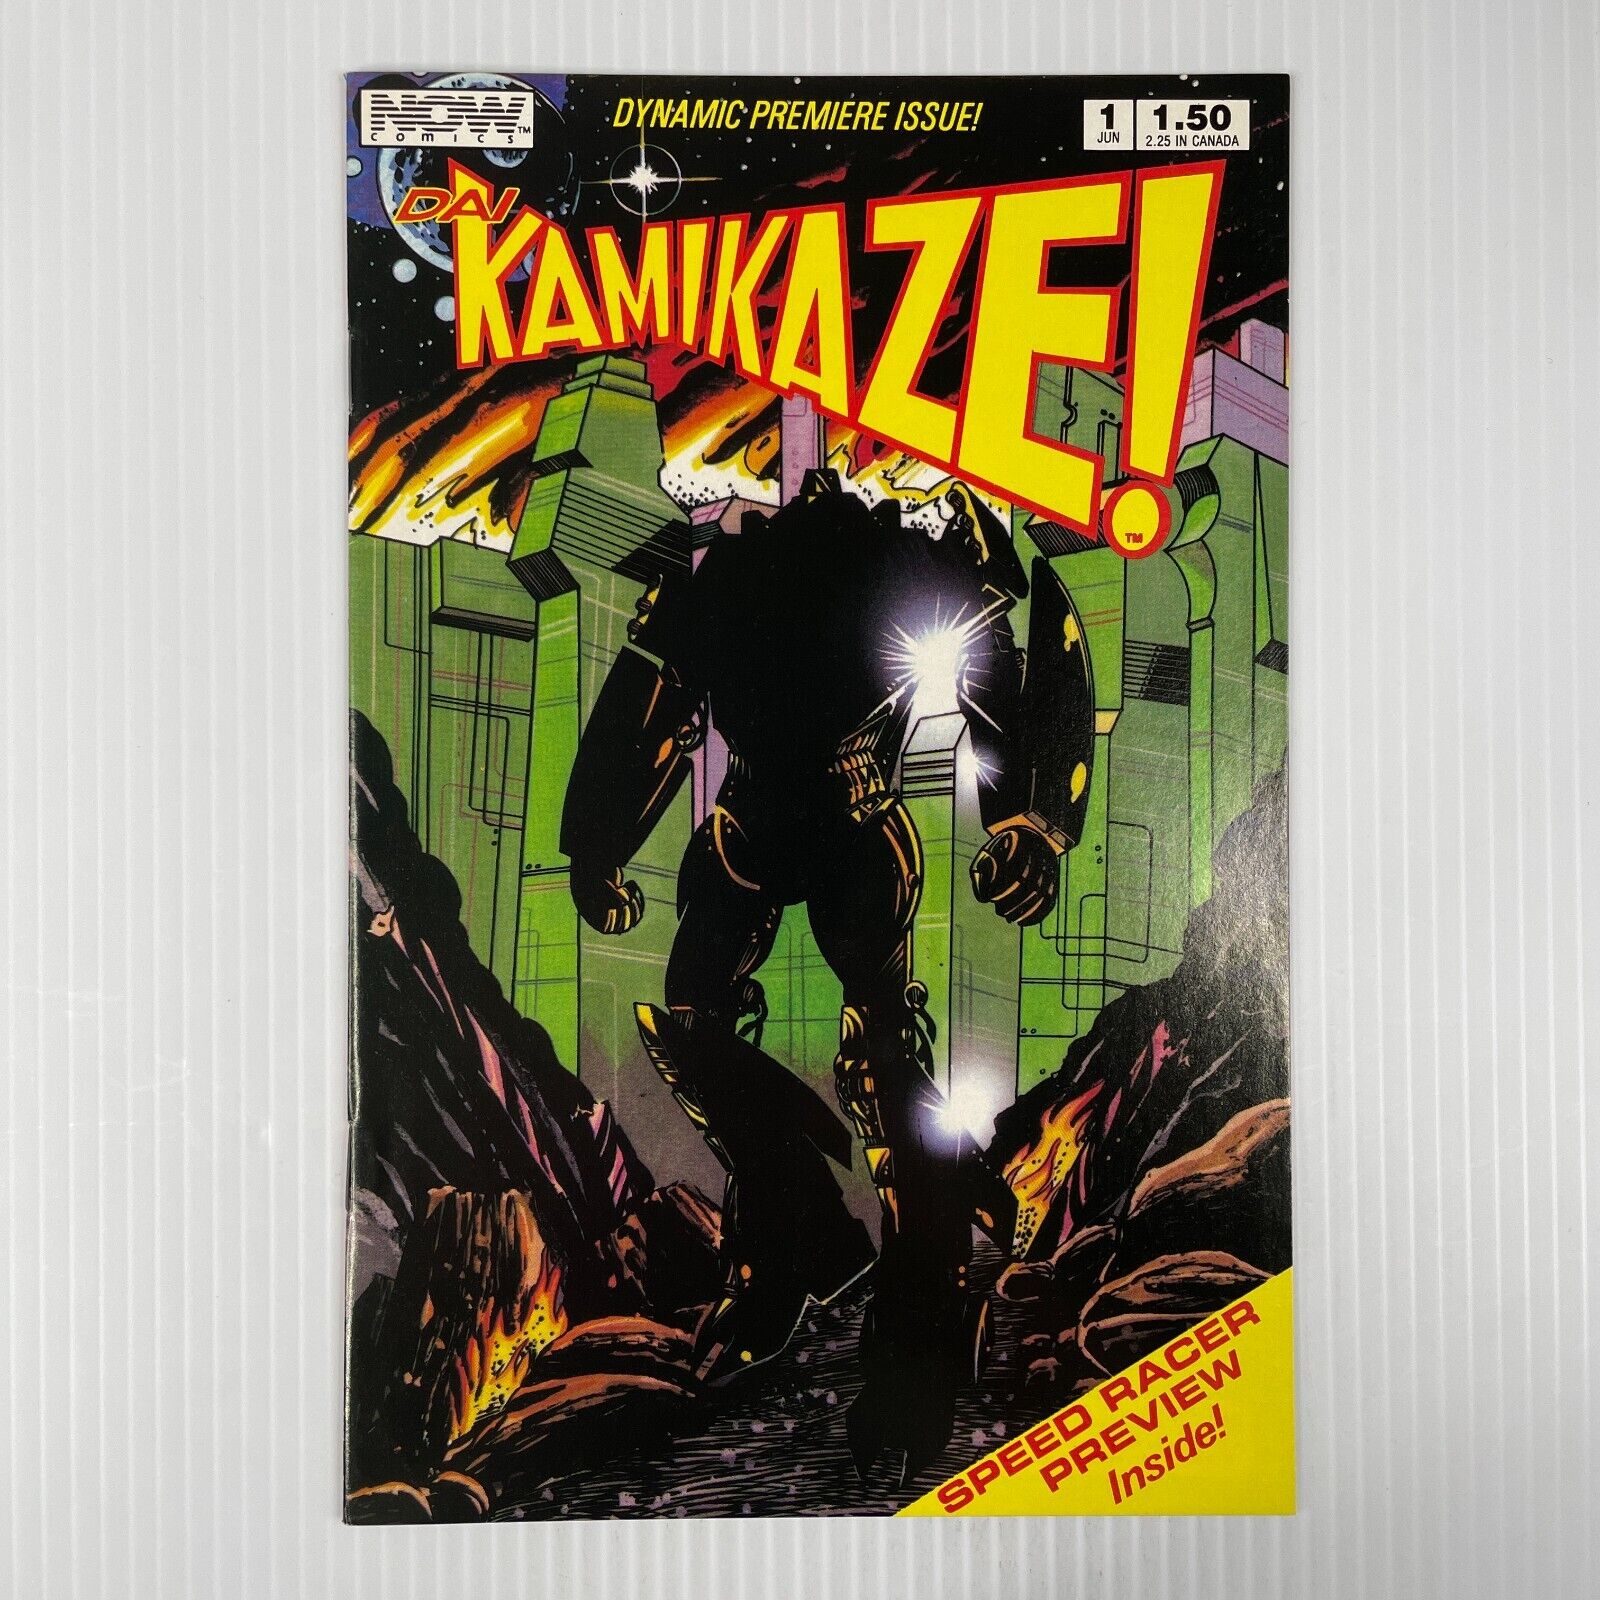 Dai Kamikaze (NOW Comics, 1987-1988) - Pick Your Issue